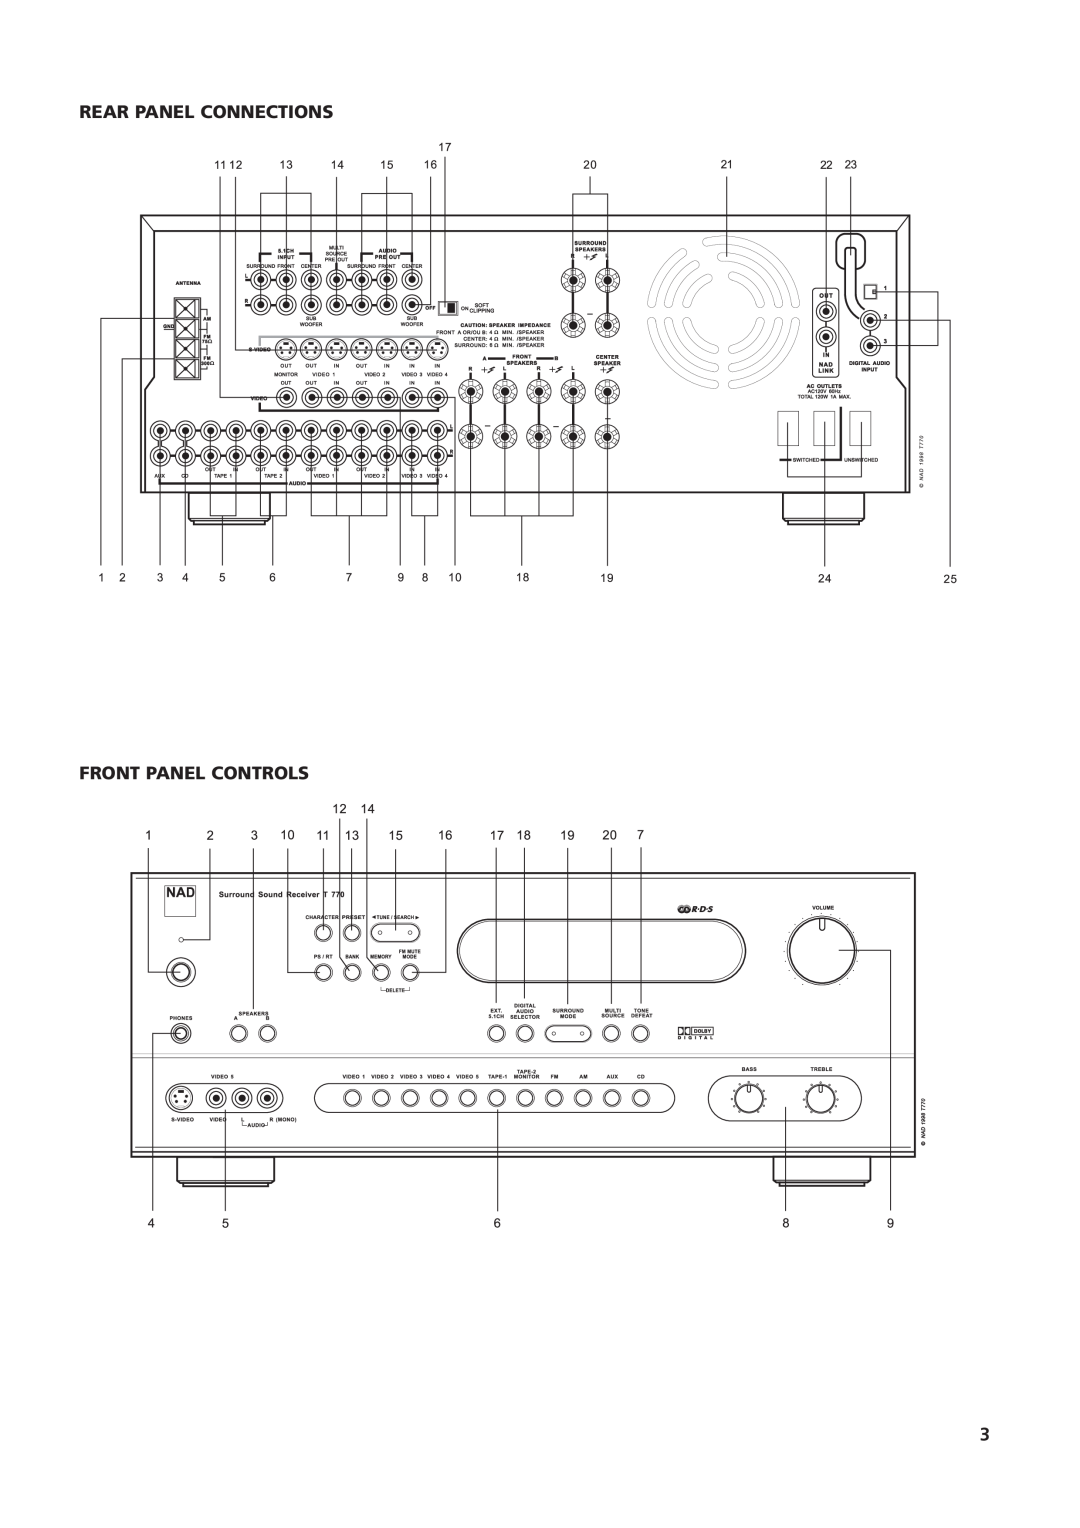 NAD T770 owner manual Rear Panel Connections Front Panel Controls 